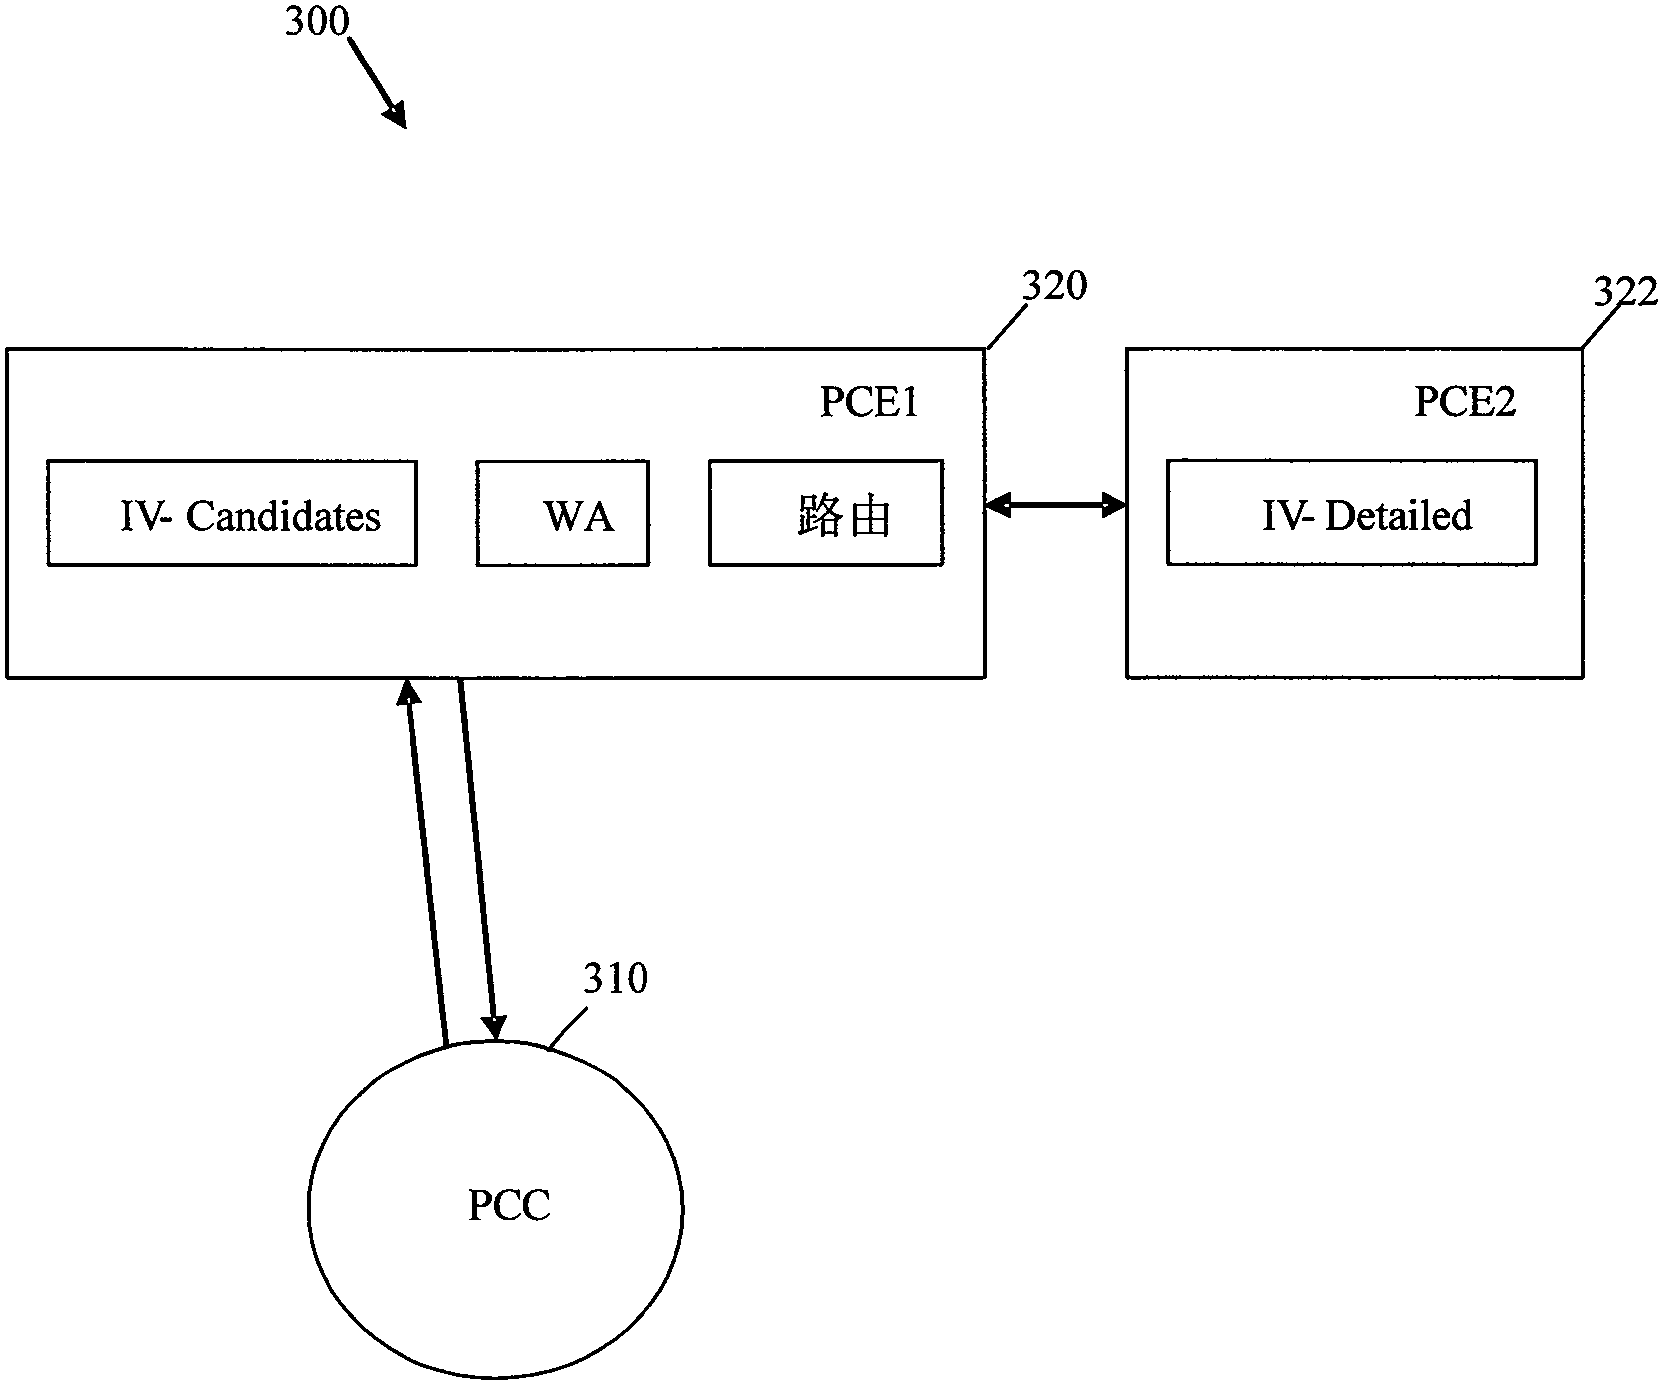 Path computation element protocol (PCEP) operations to support wavelength switched optical network routing, wavelength assignment, and impairment validation